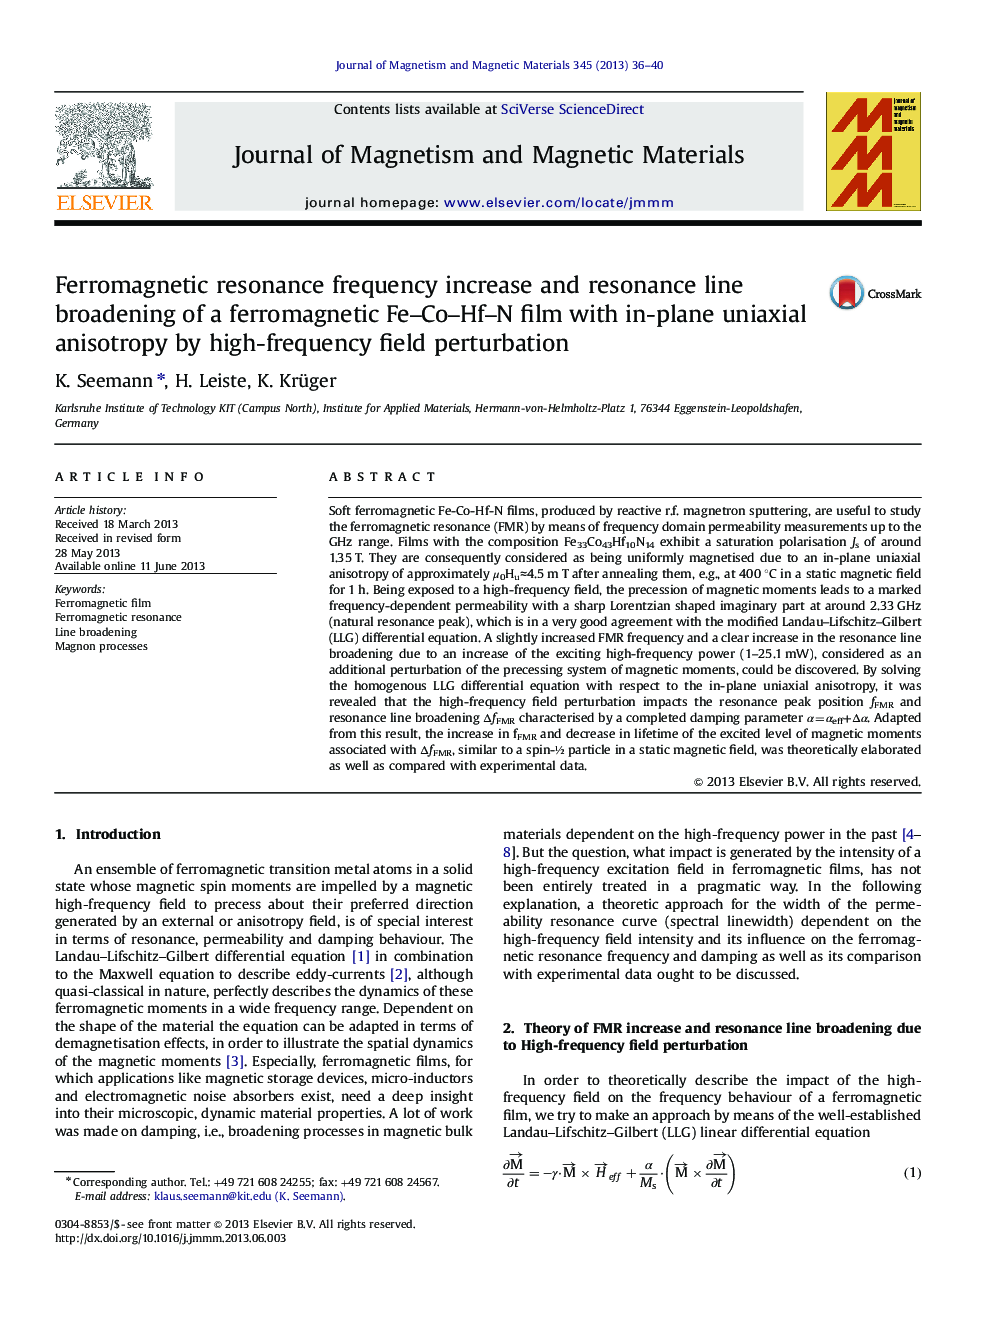 Ferromagnetic resonance frequency increase and resonance line broadening of a ferromagnetic Fe–Co–Hf–N film with in-plane uniaxial anisotropy by high-frequency field perturbation